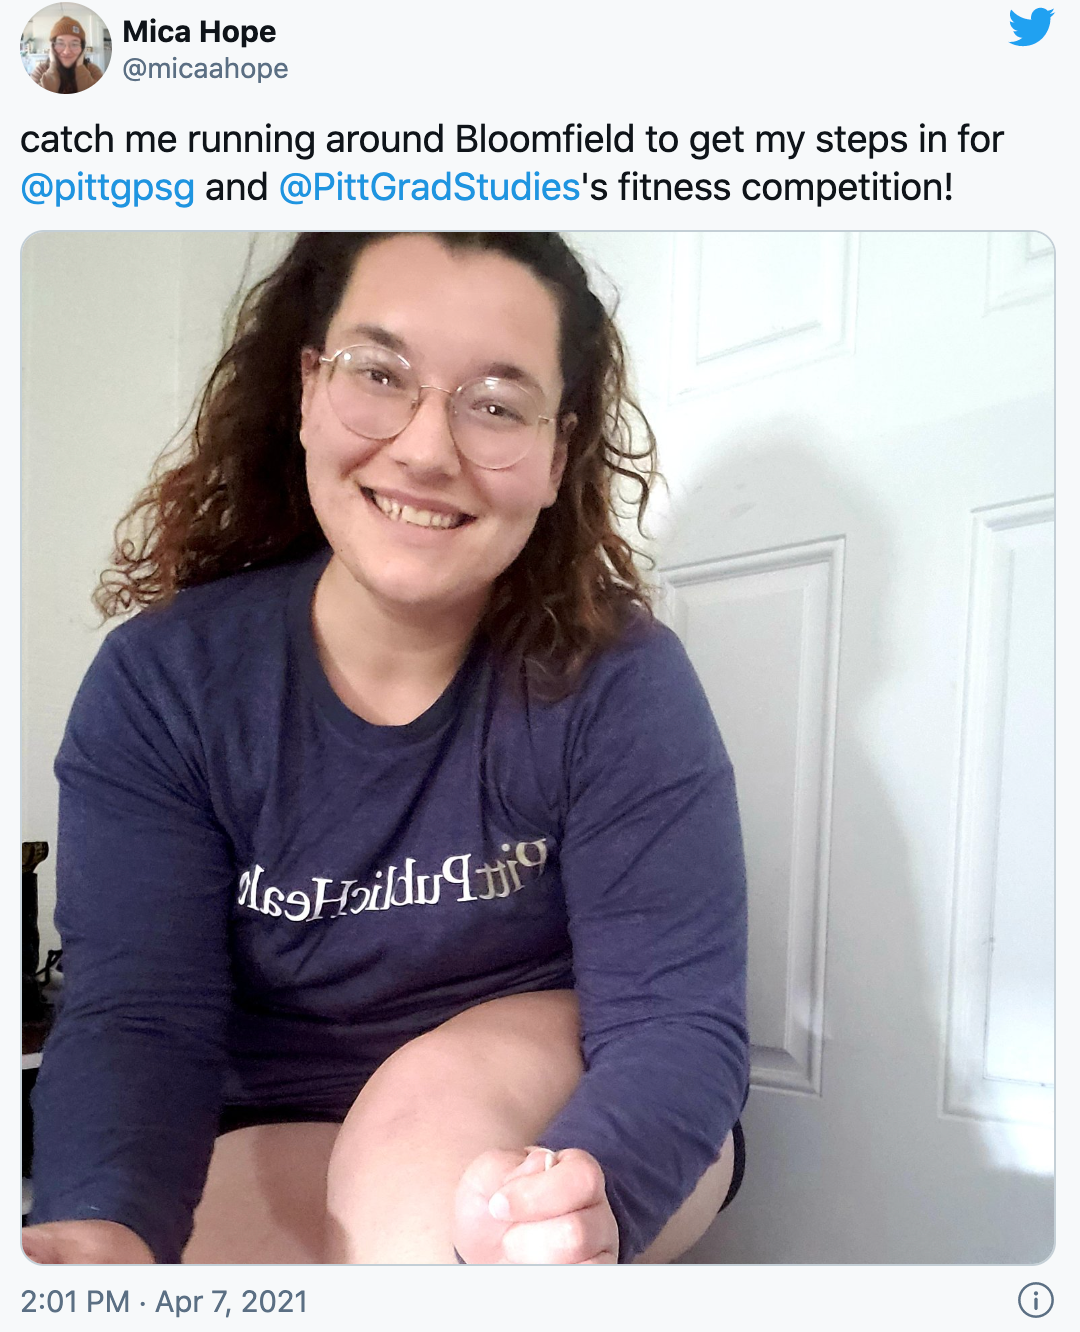 a screenshot of a tweet by @micahope that says "catch me running around Bloomfield to get my steps in for @pittgpsg and @PittGradStudies's fitness competition!"